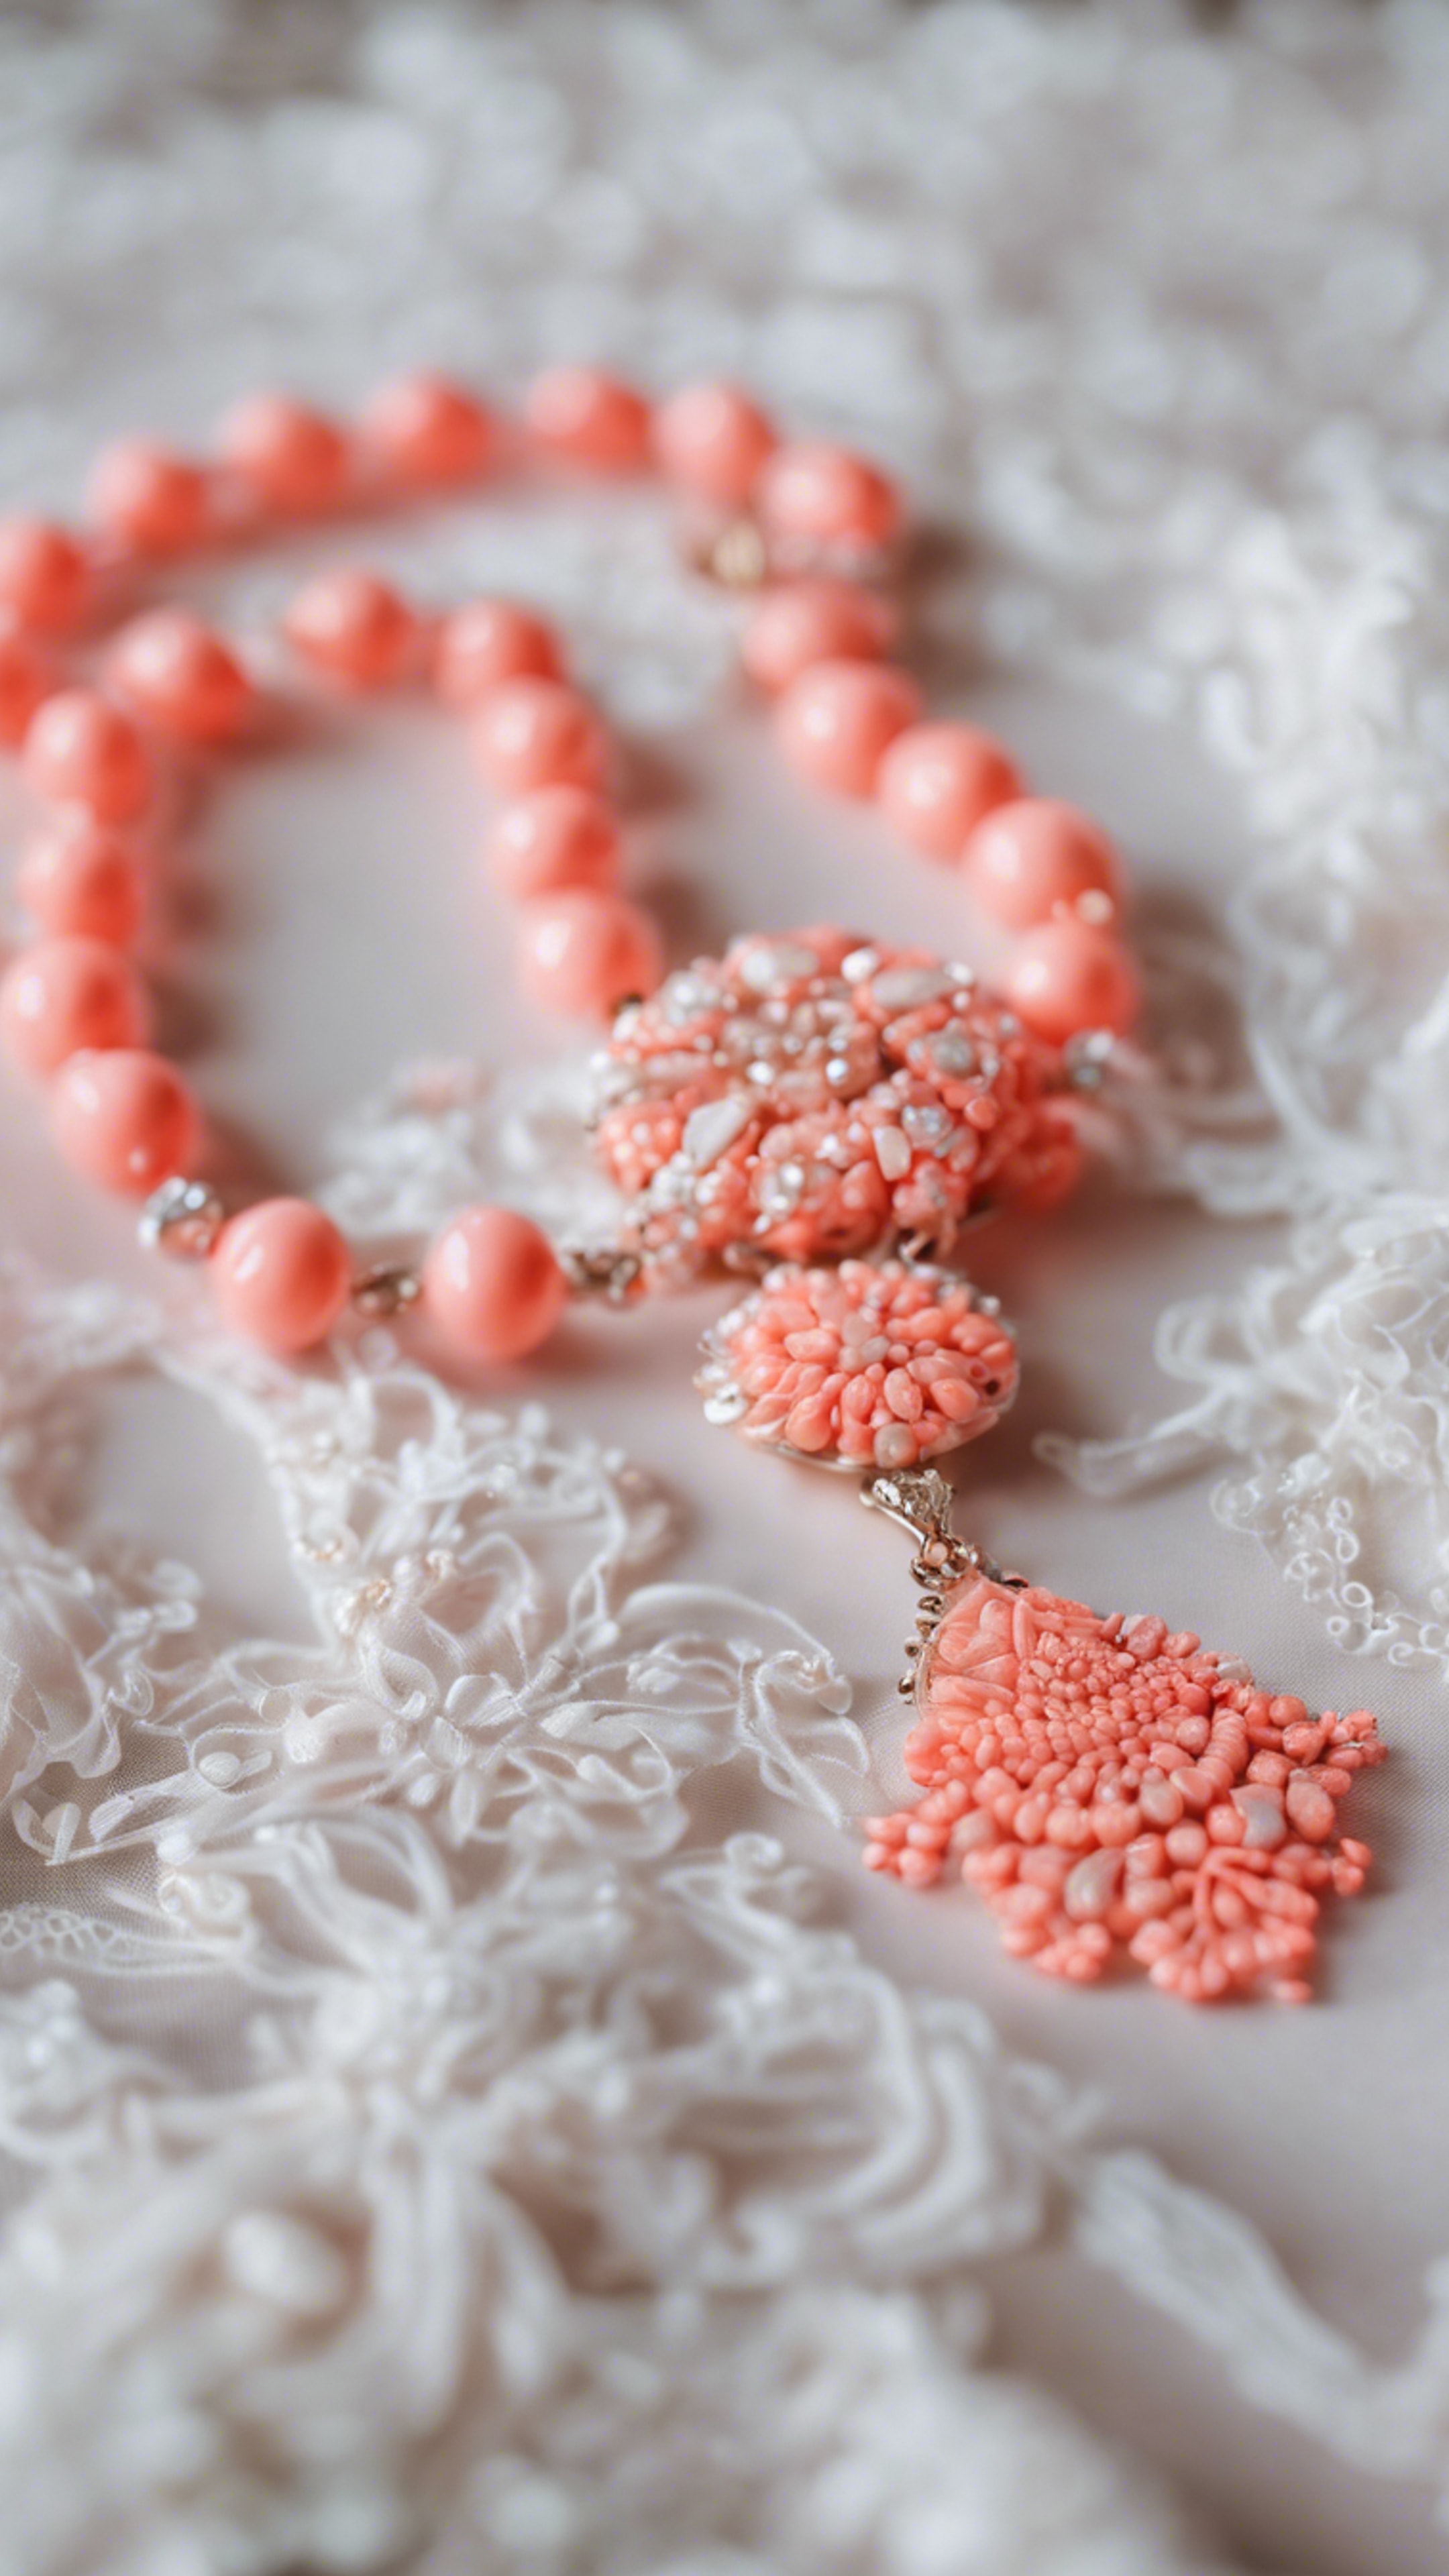 A preppy neon coral necklace against a white lace dress. Hintergrund[7558fb99fbaf41faa5f9]